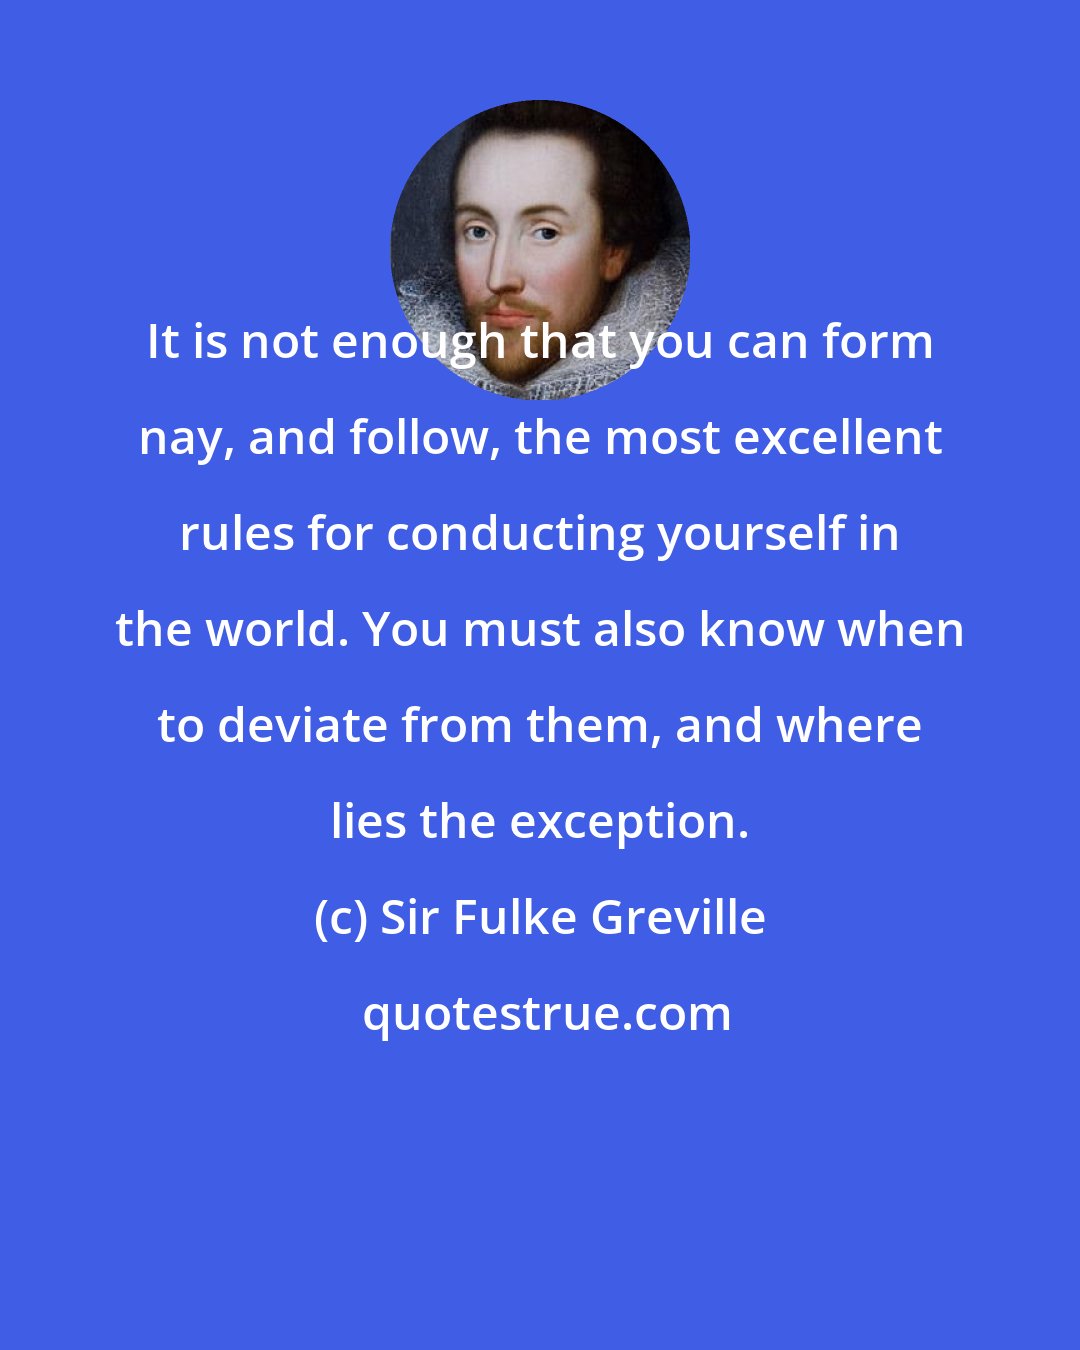 Sir Fulke Greville: It is not enough that you can form nay, and follow, the most excellent rules for conducting yourself in the world. You must also know when to deviate from them, and where lies the exception.